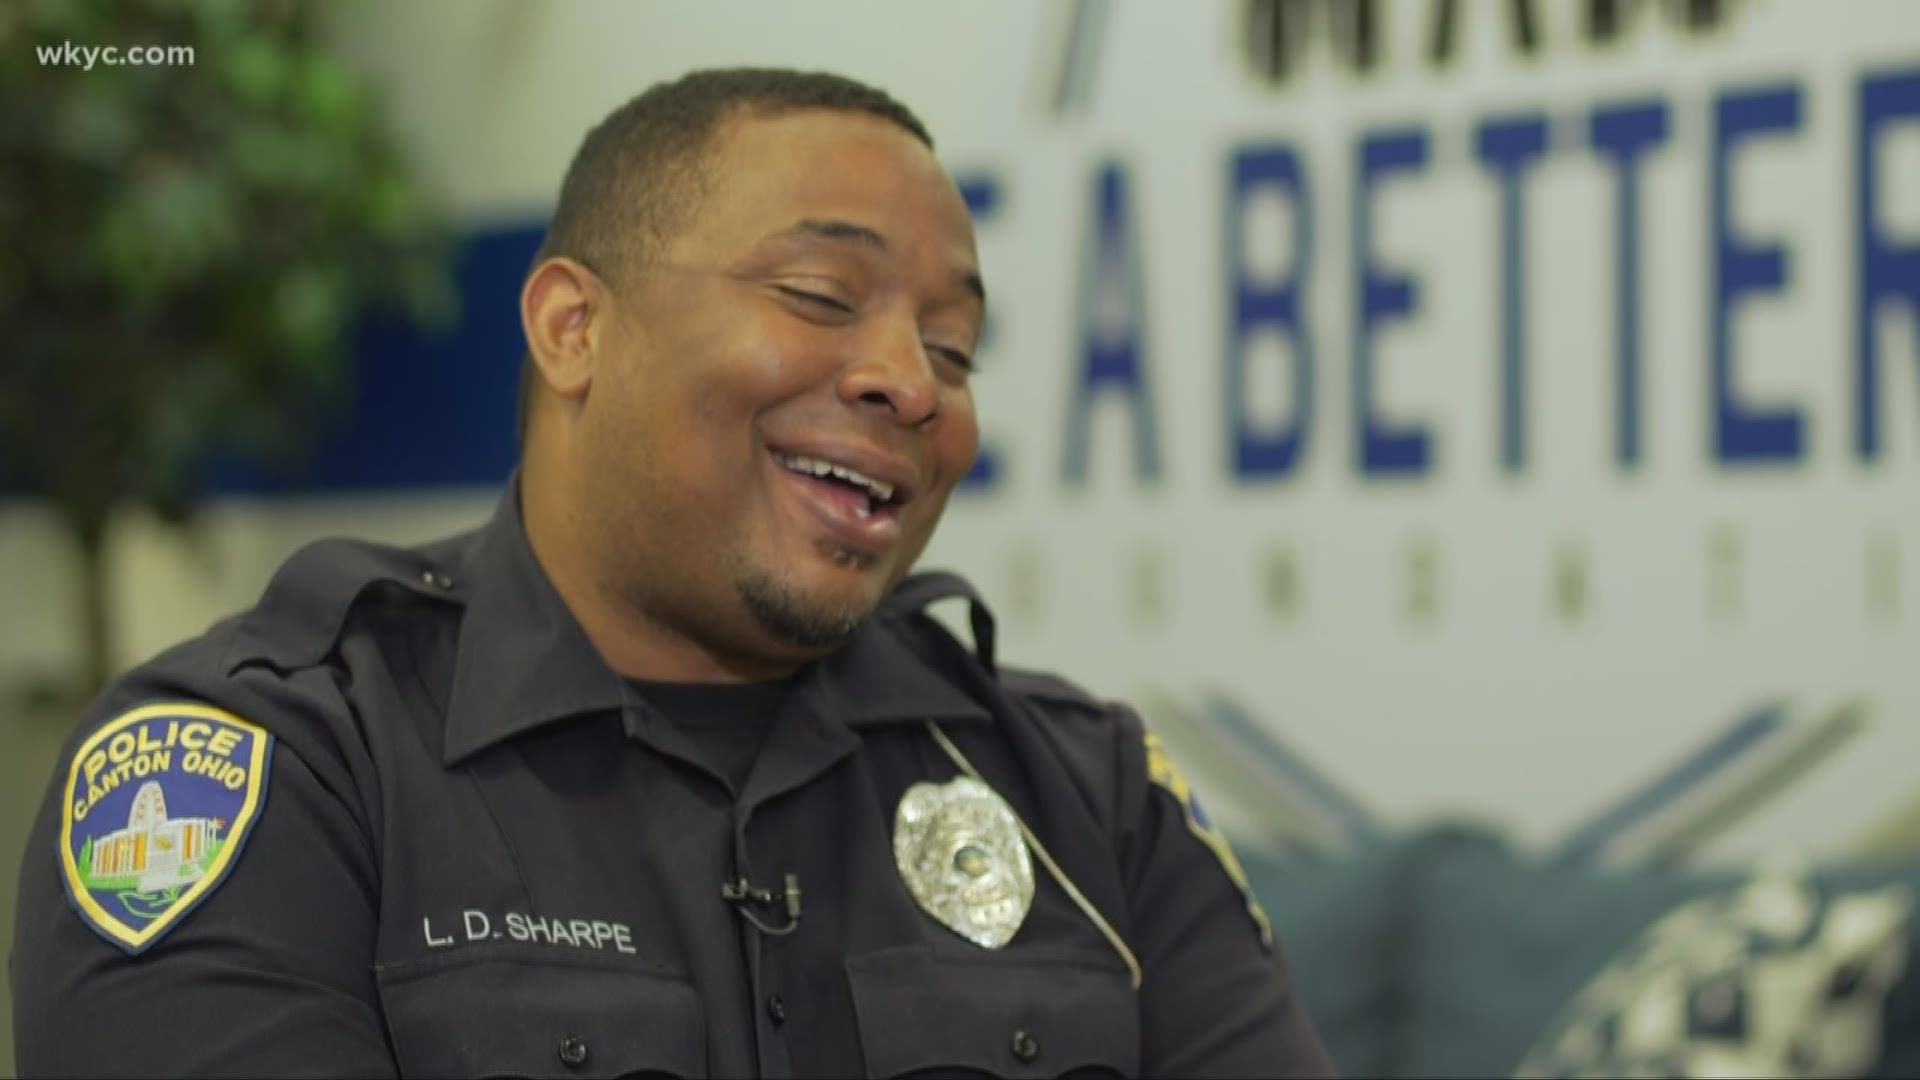 Meet the Canton police officer going above and beyond the call -of-duty